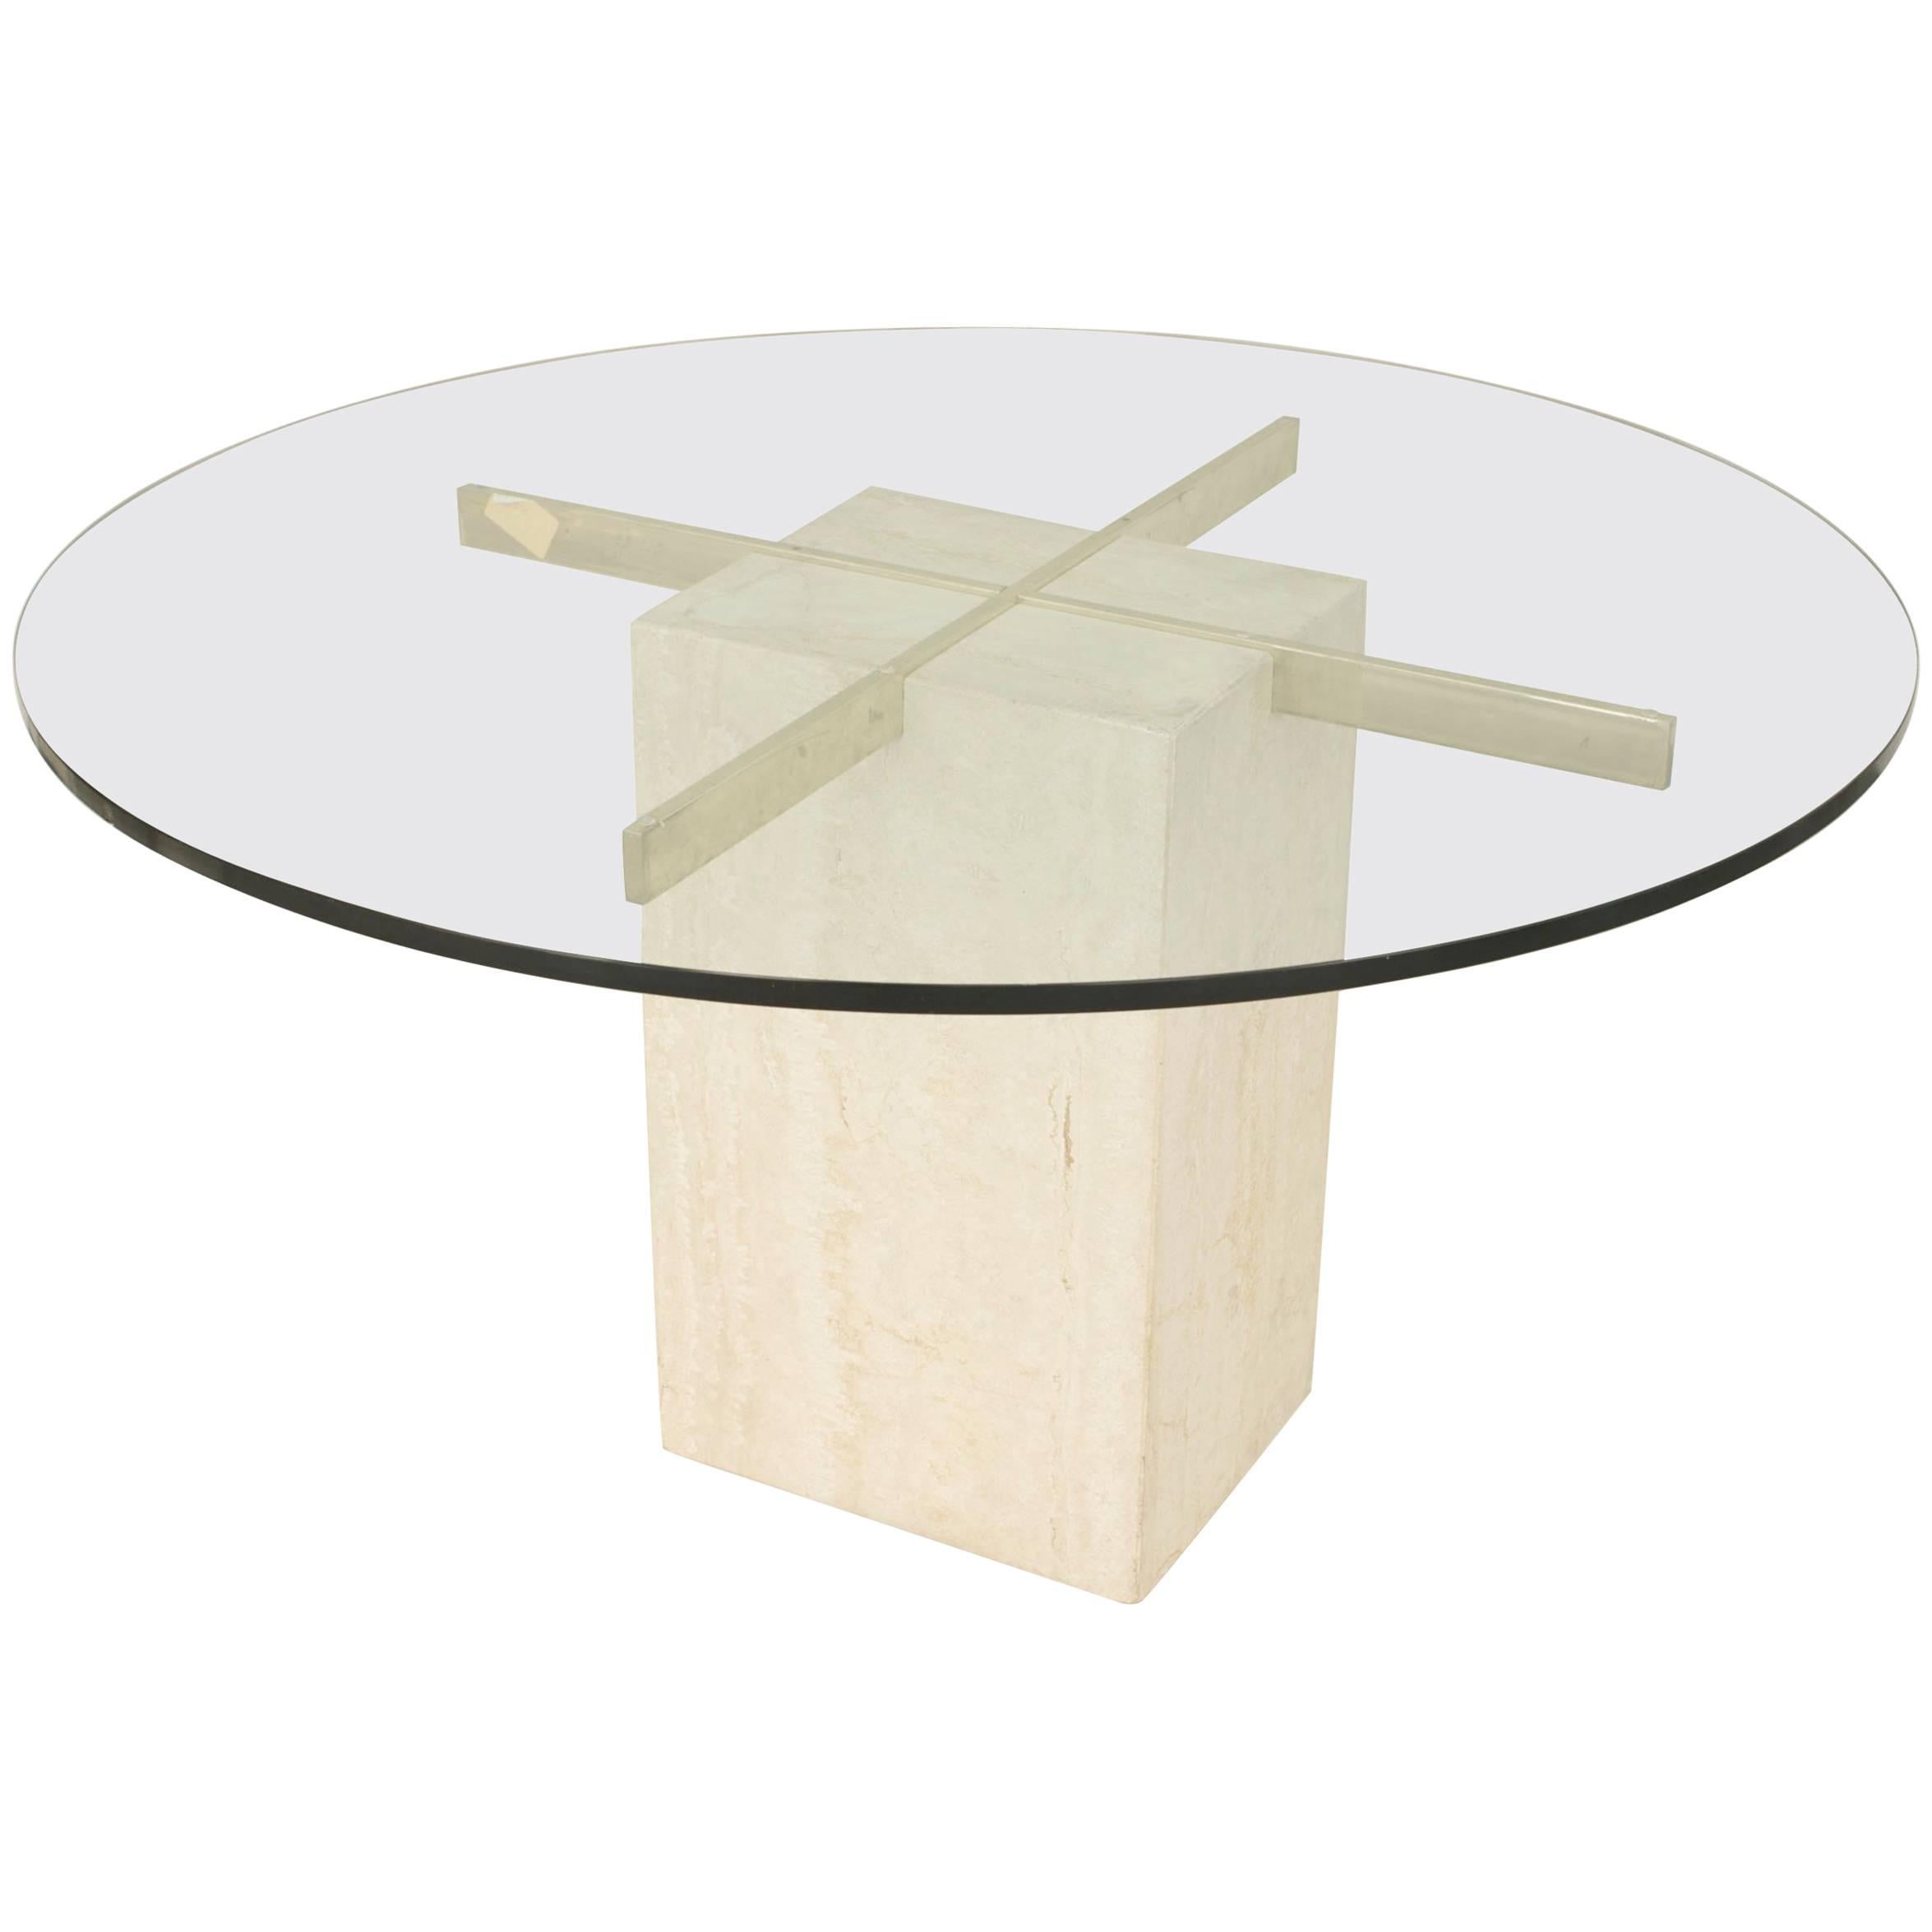 American Postwar Design Dining Table with a Square Travertine Base